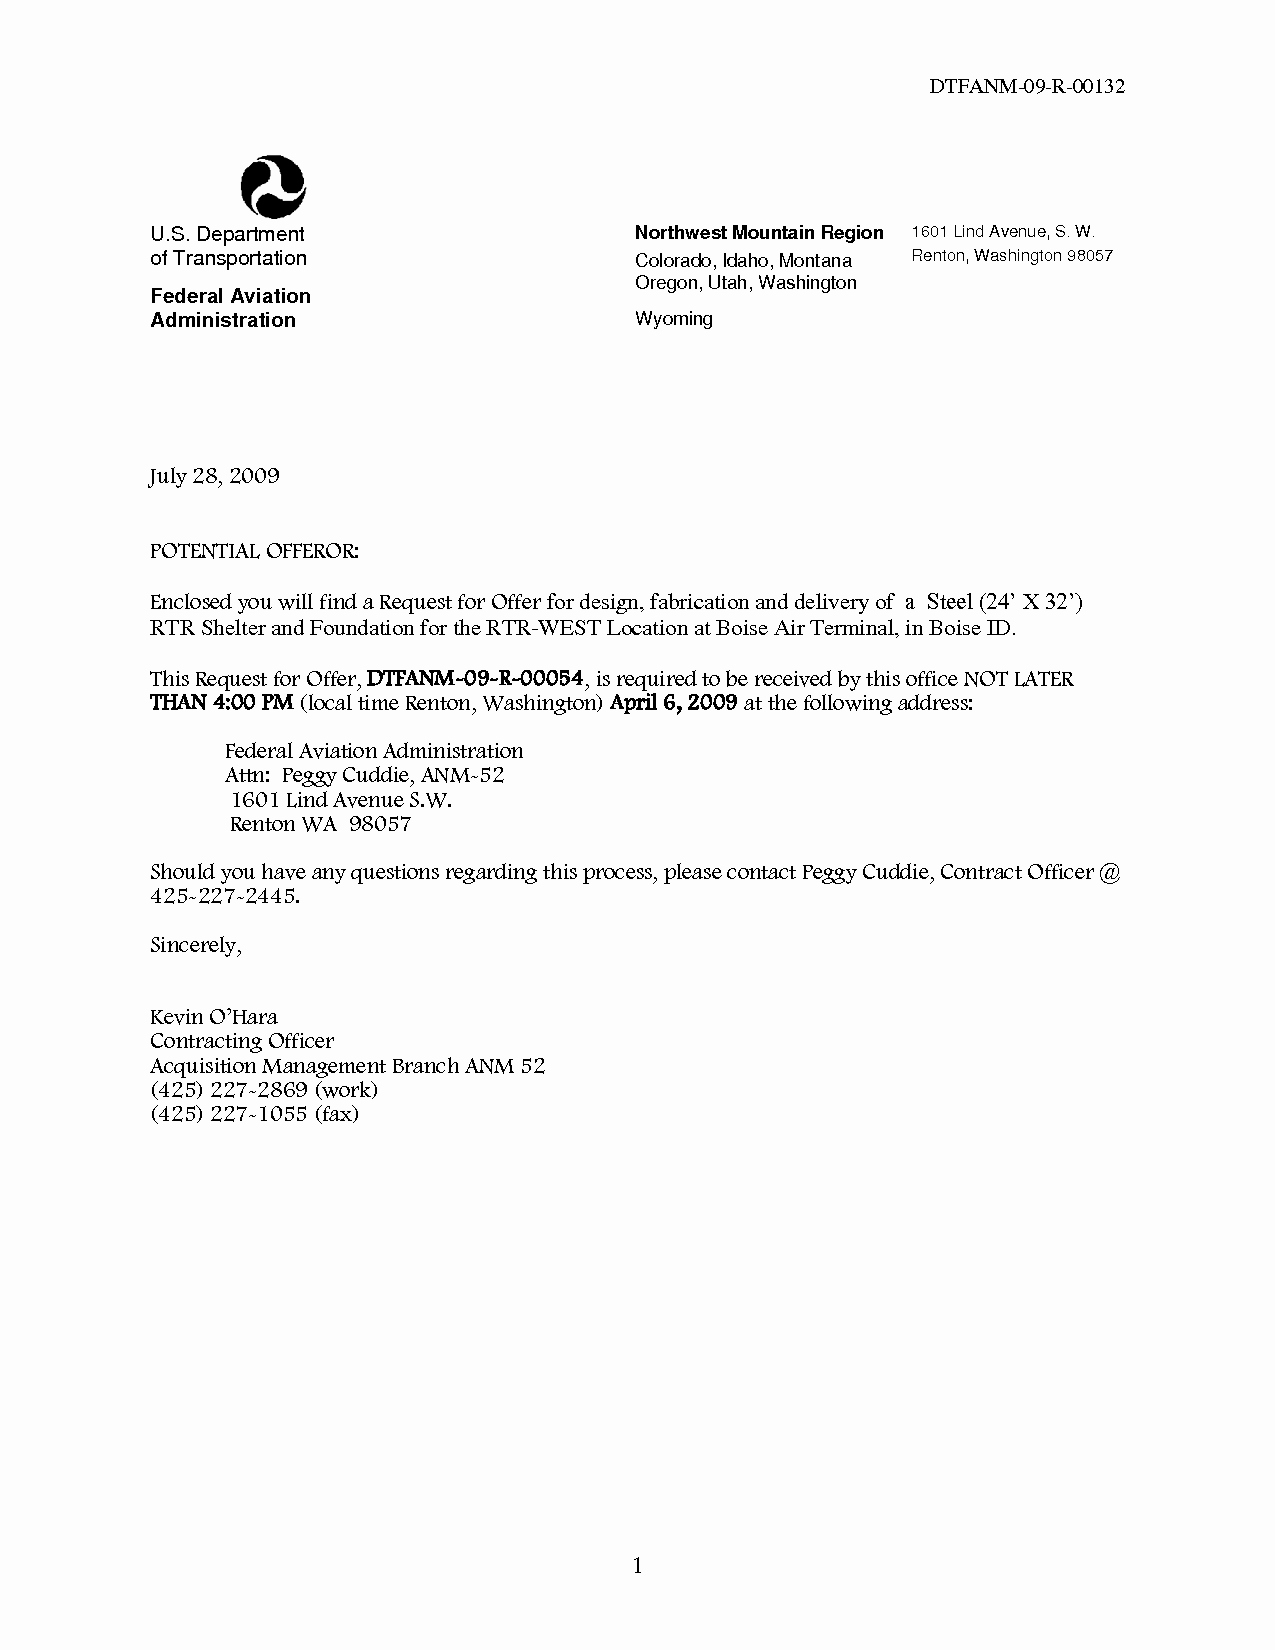 Recommendation Letter Sample From Employer Lovely Bank Reference Letter Template Mughals